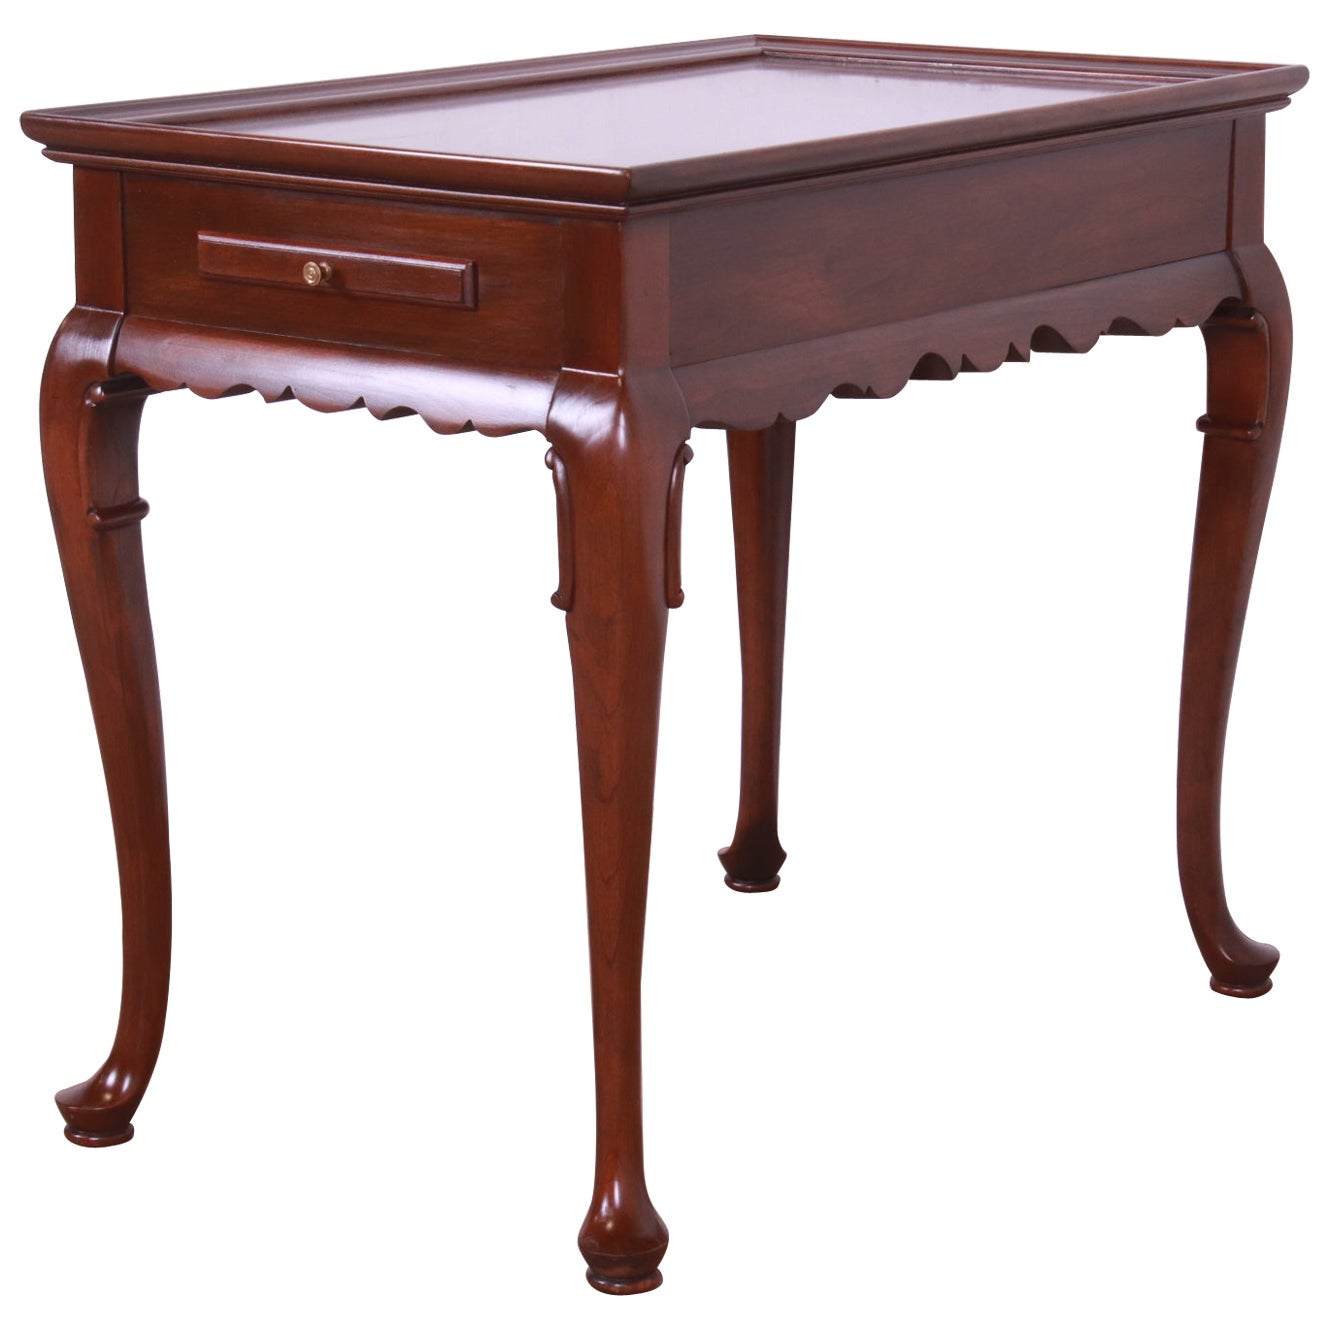 Ethan Allen Queen Anne Cherry Wood Tea Table or Occasional Side Table